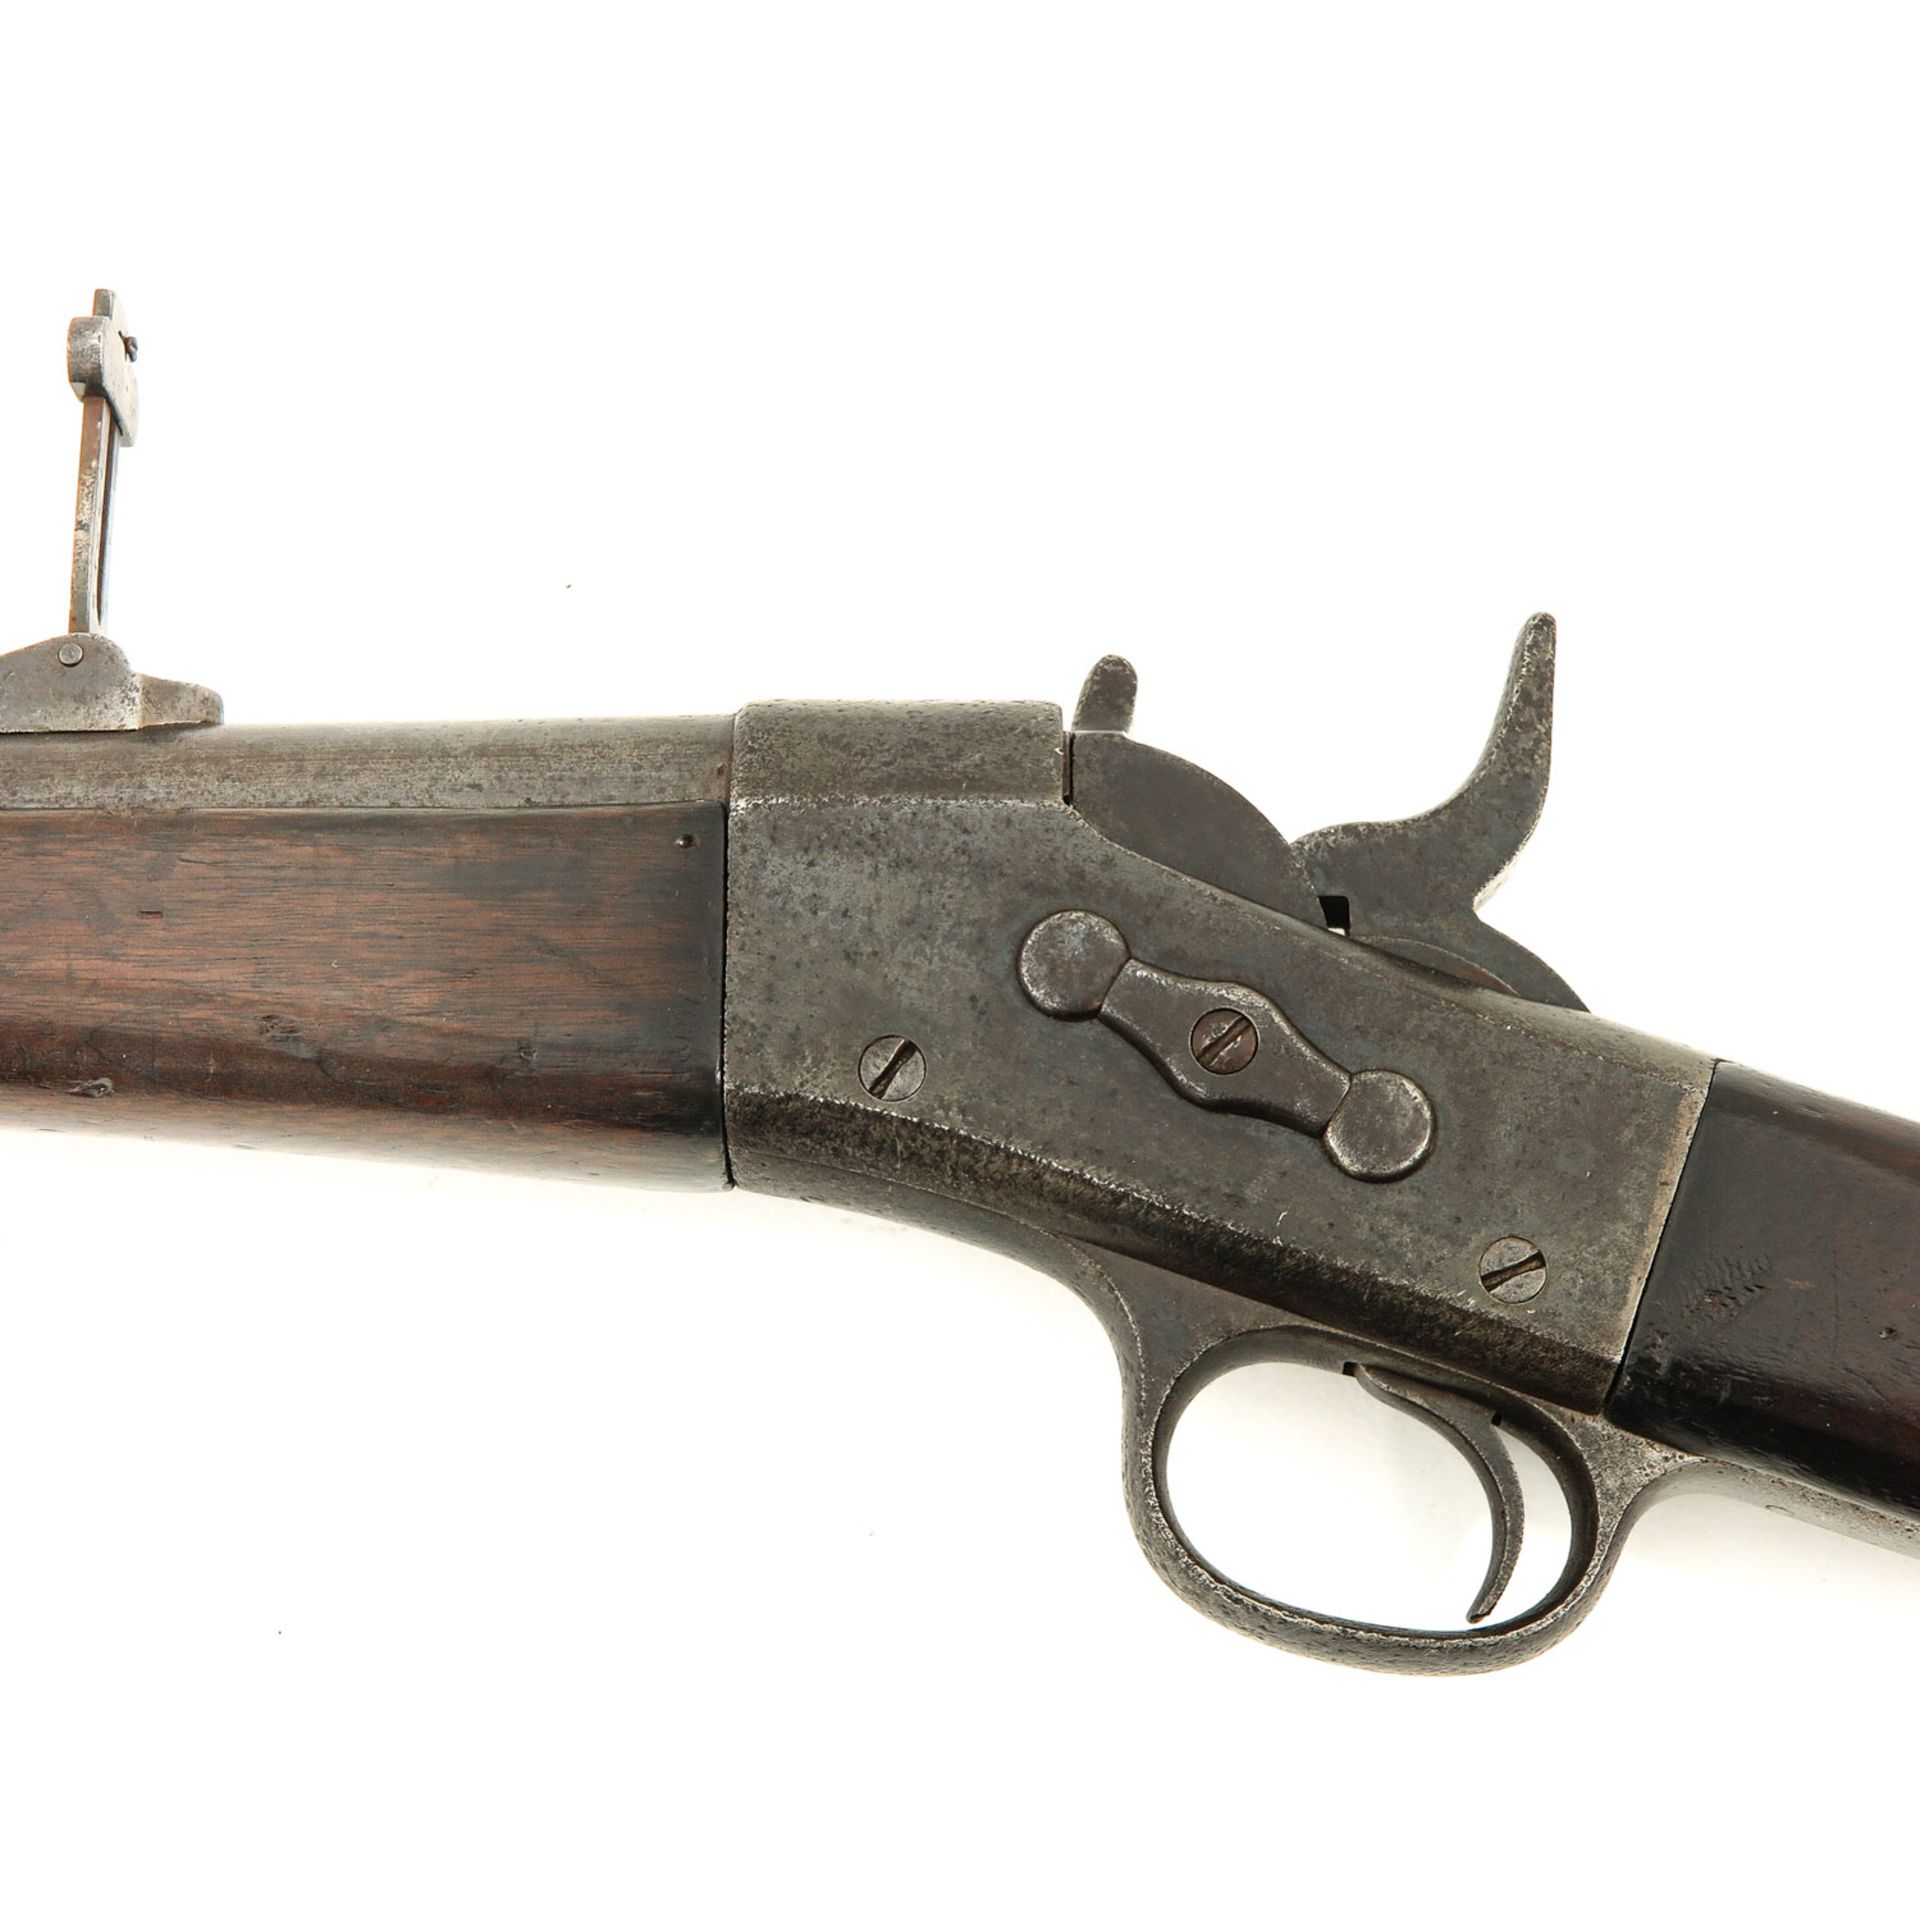 A Remington Carbine with Matching Bayonet - Image 7 of 10